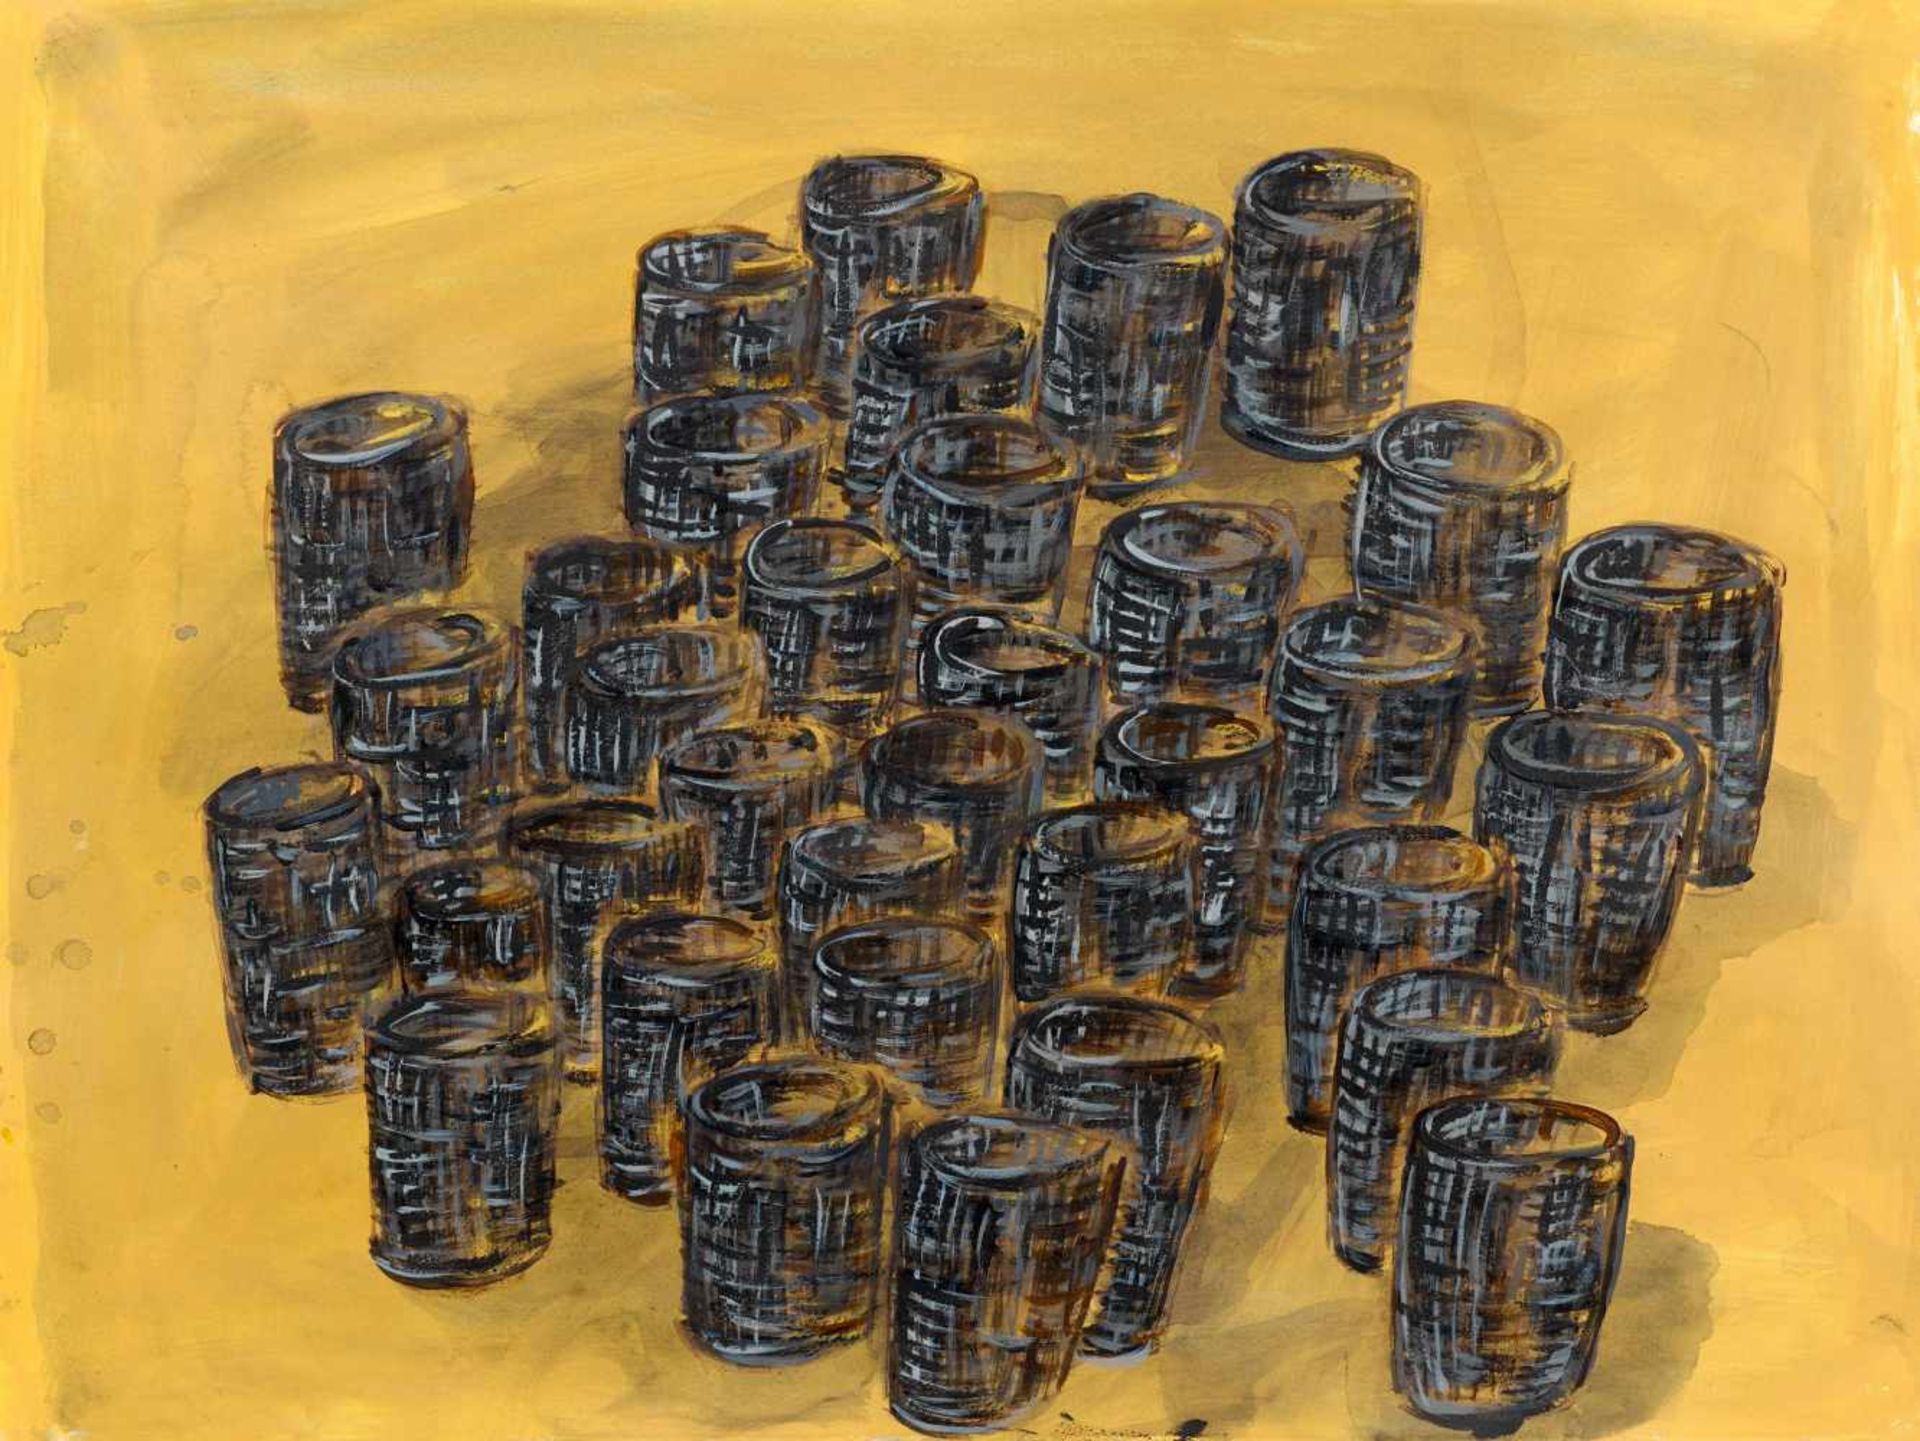 Barlow, Phyllida1944 Newcastle-upon-Tyne"untitled containers". 2011. Acrylic on watercolour paper.